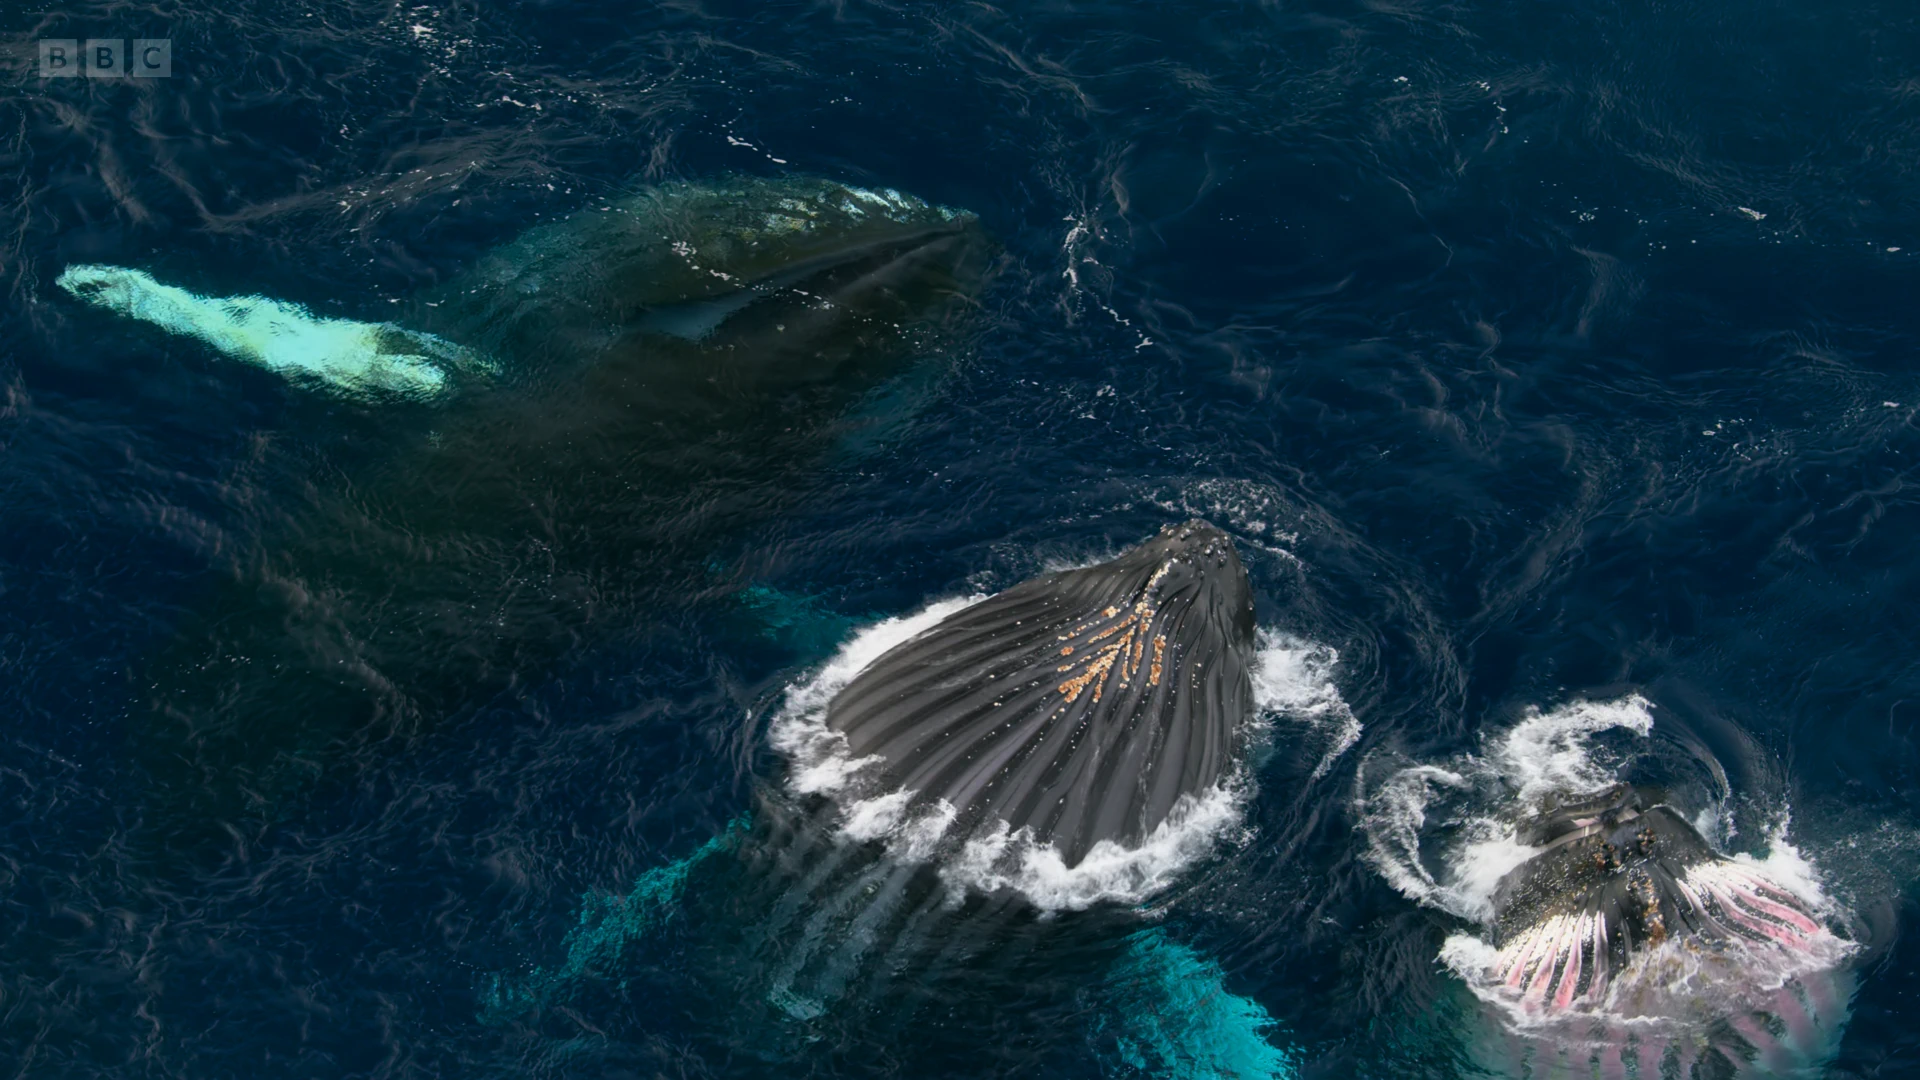 Humpback whale (Megaptera novaeangliae) as shown in Seven Worlds, One Planet - Antarctica